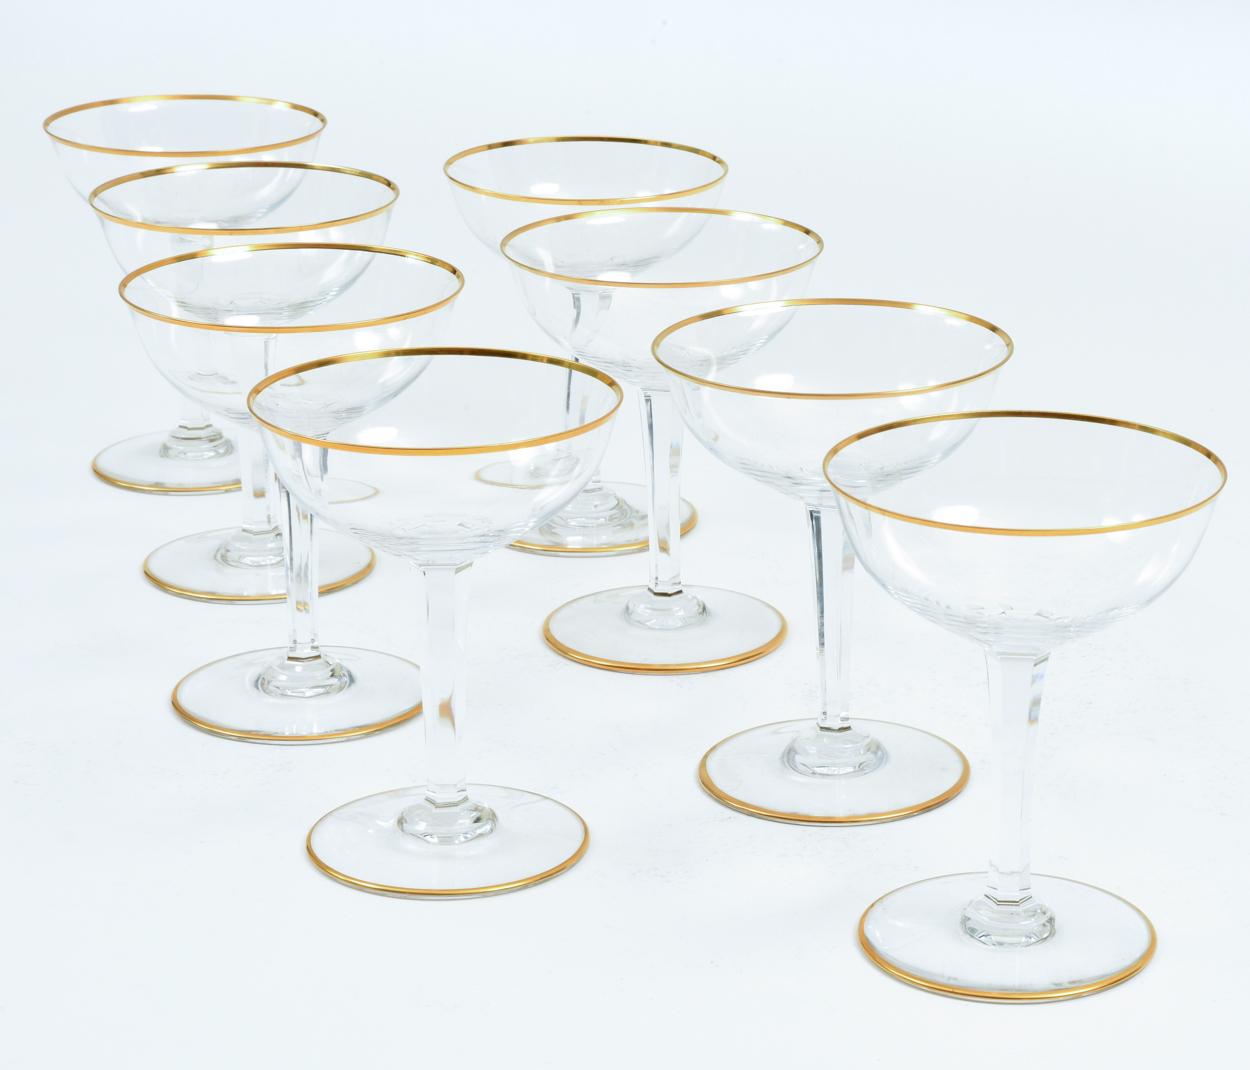 Vintage Baccarat Crystal Barware Champagne Coupe Service for Eight People 1